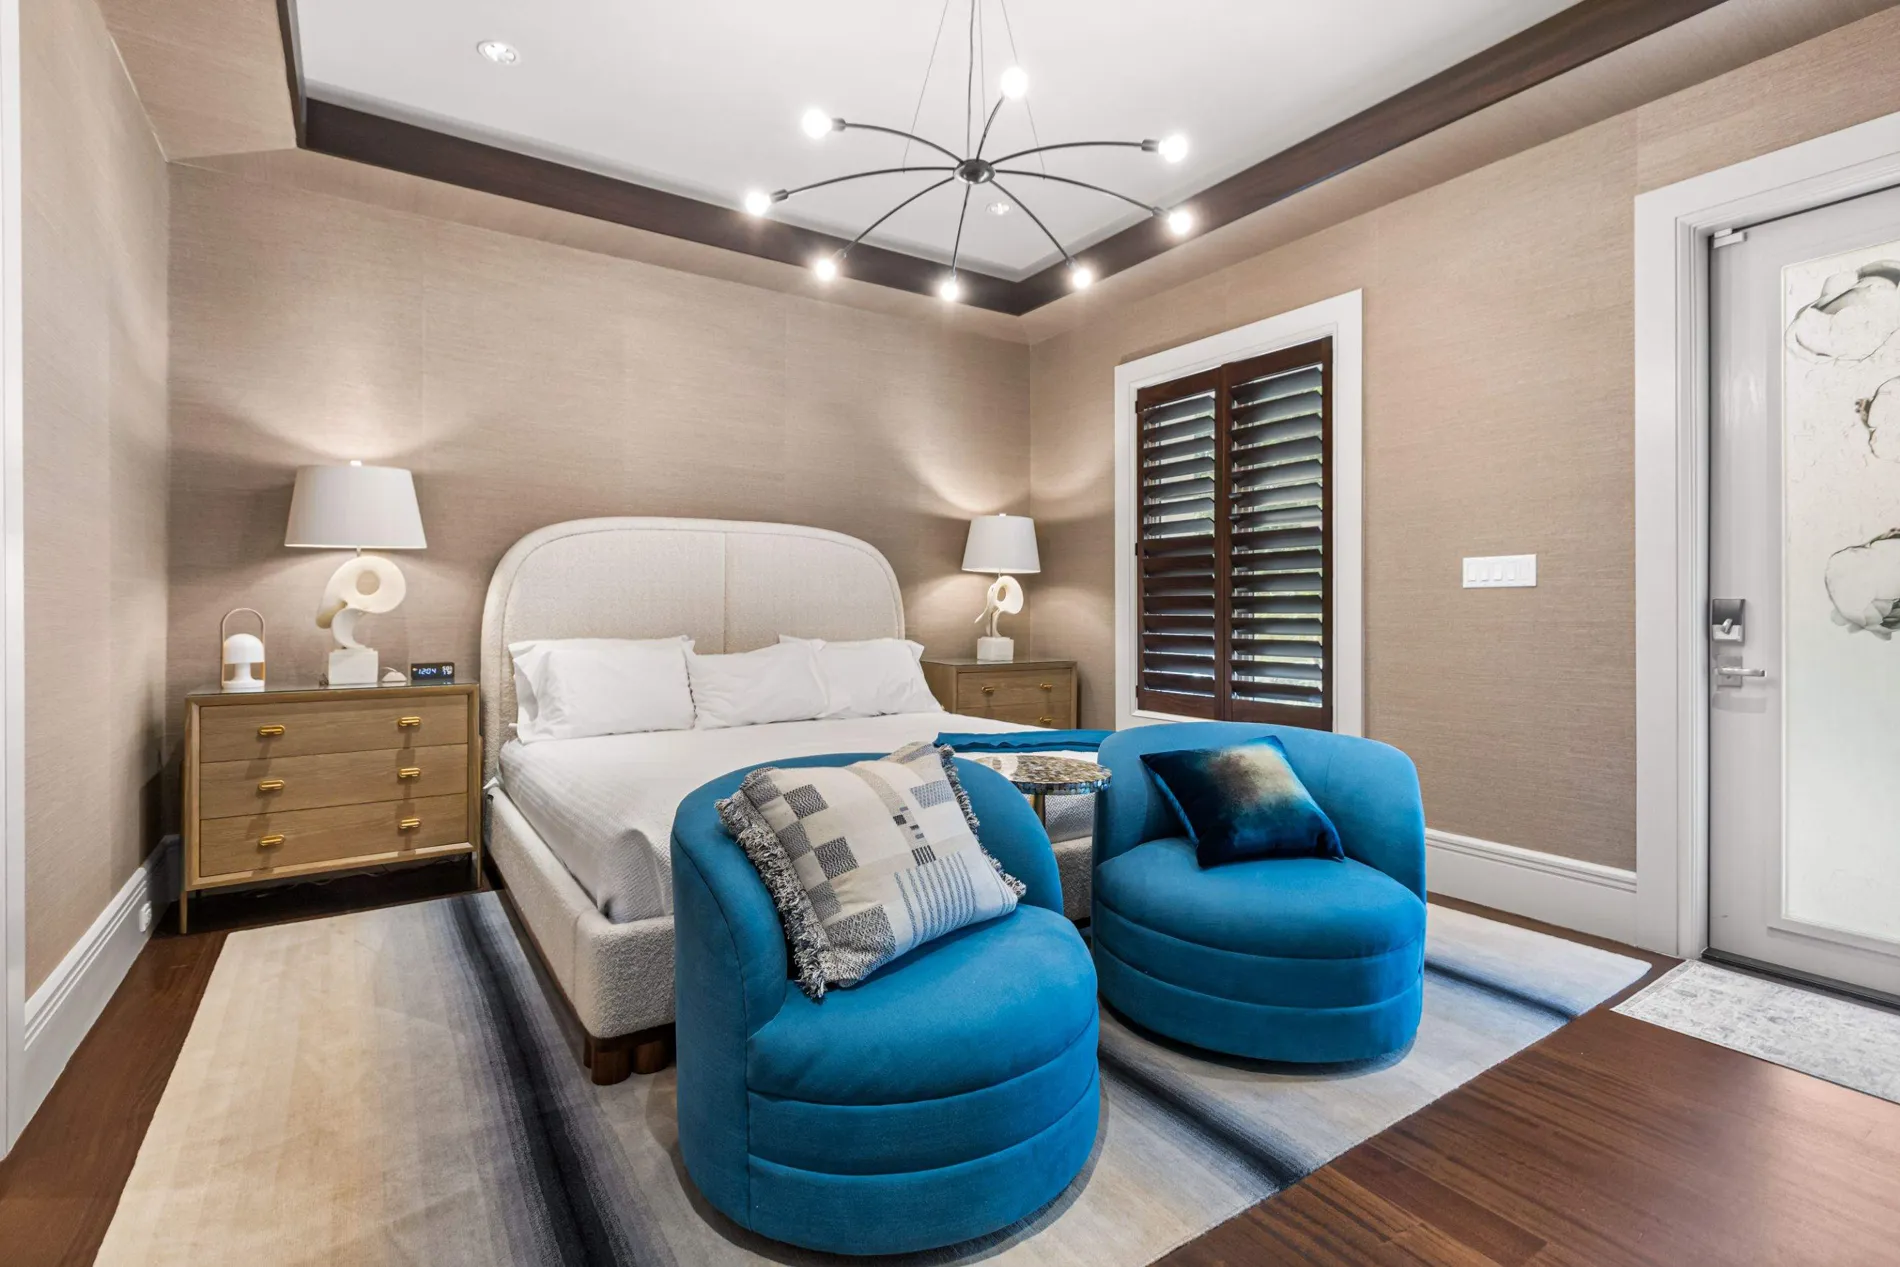 Luxury bedroom remodel at a home in Park Shore, Naples, FL